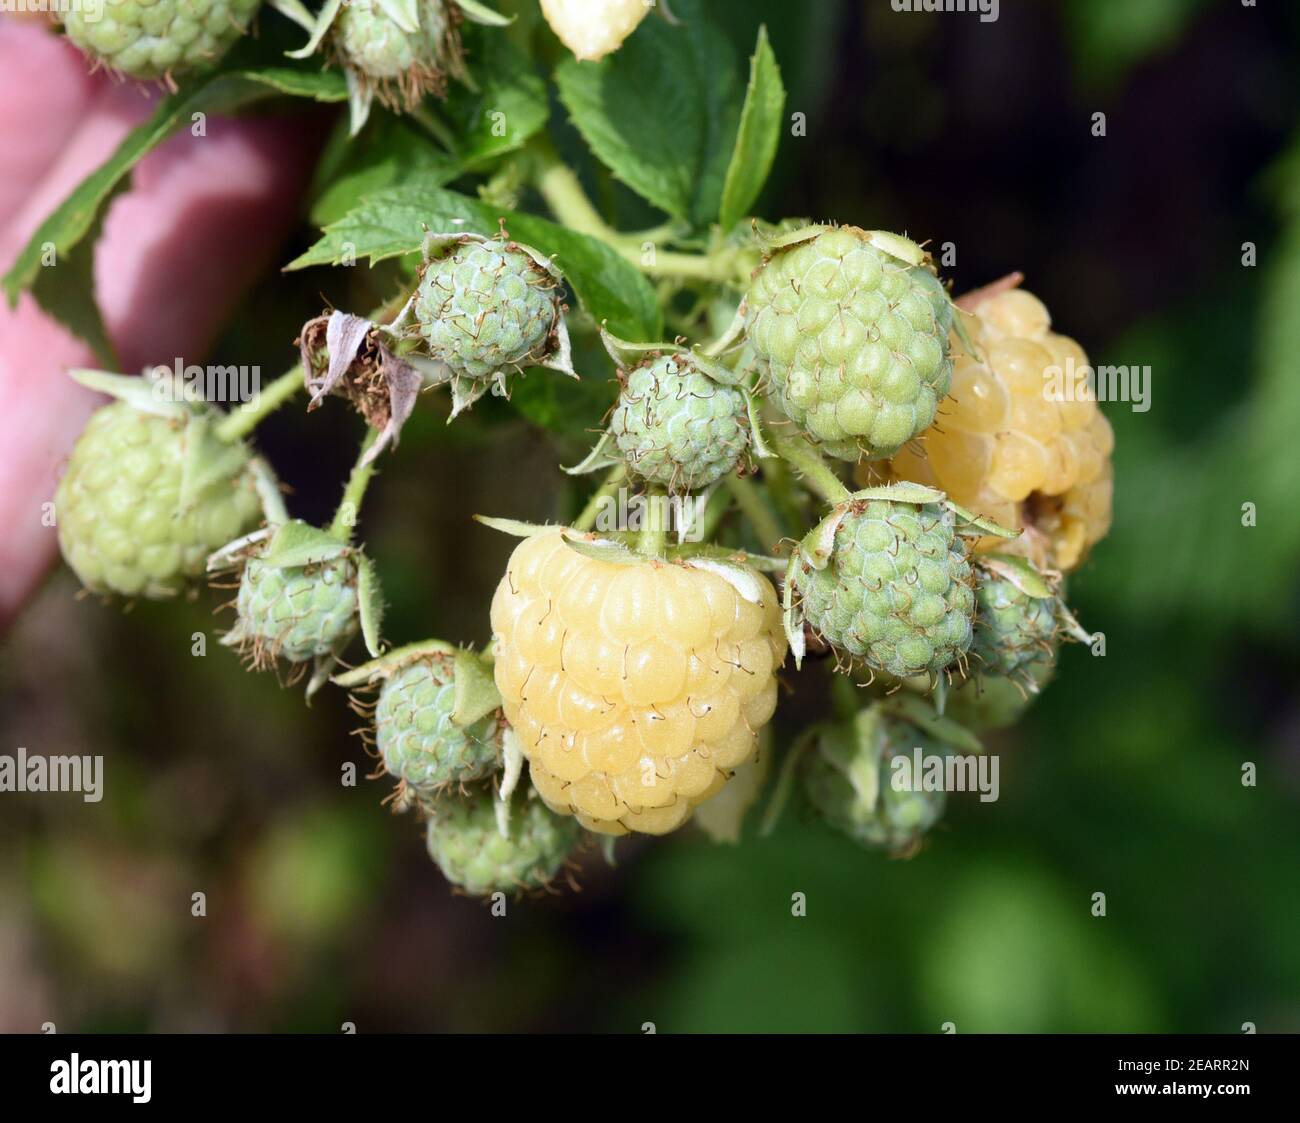 hi-res stock photography images - Alamy